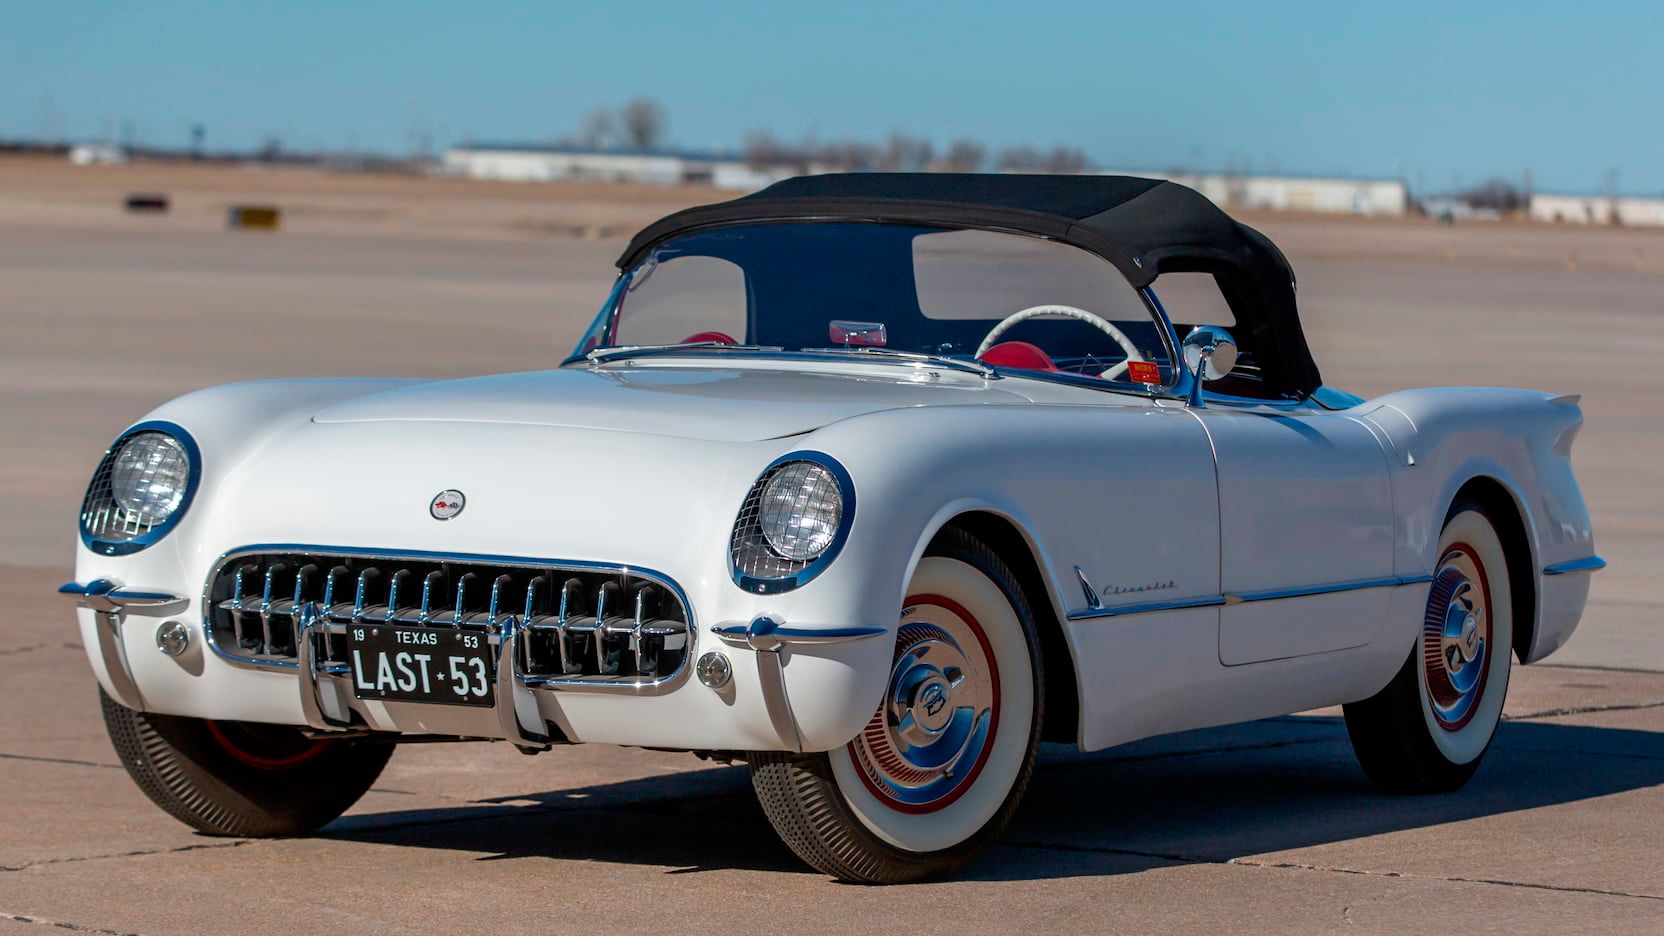 10 Things That Make The Chevrolet Corvette America’s Most Iconic Sports Car